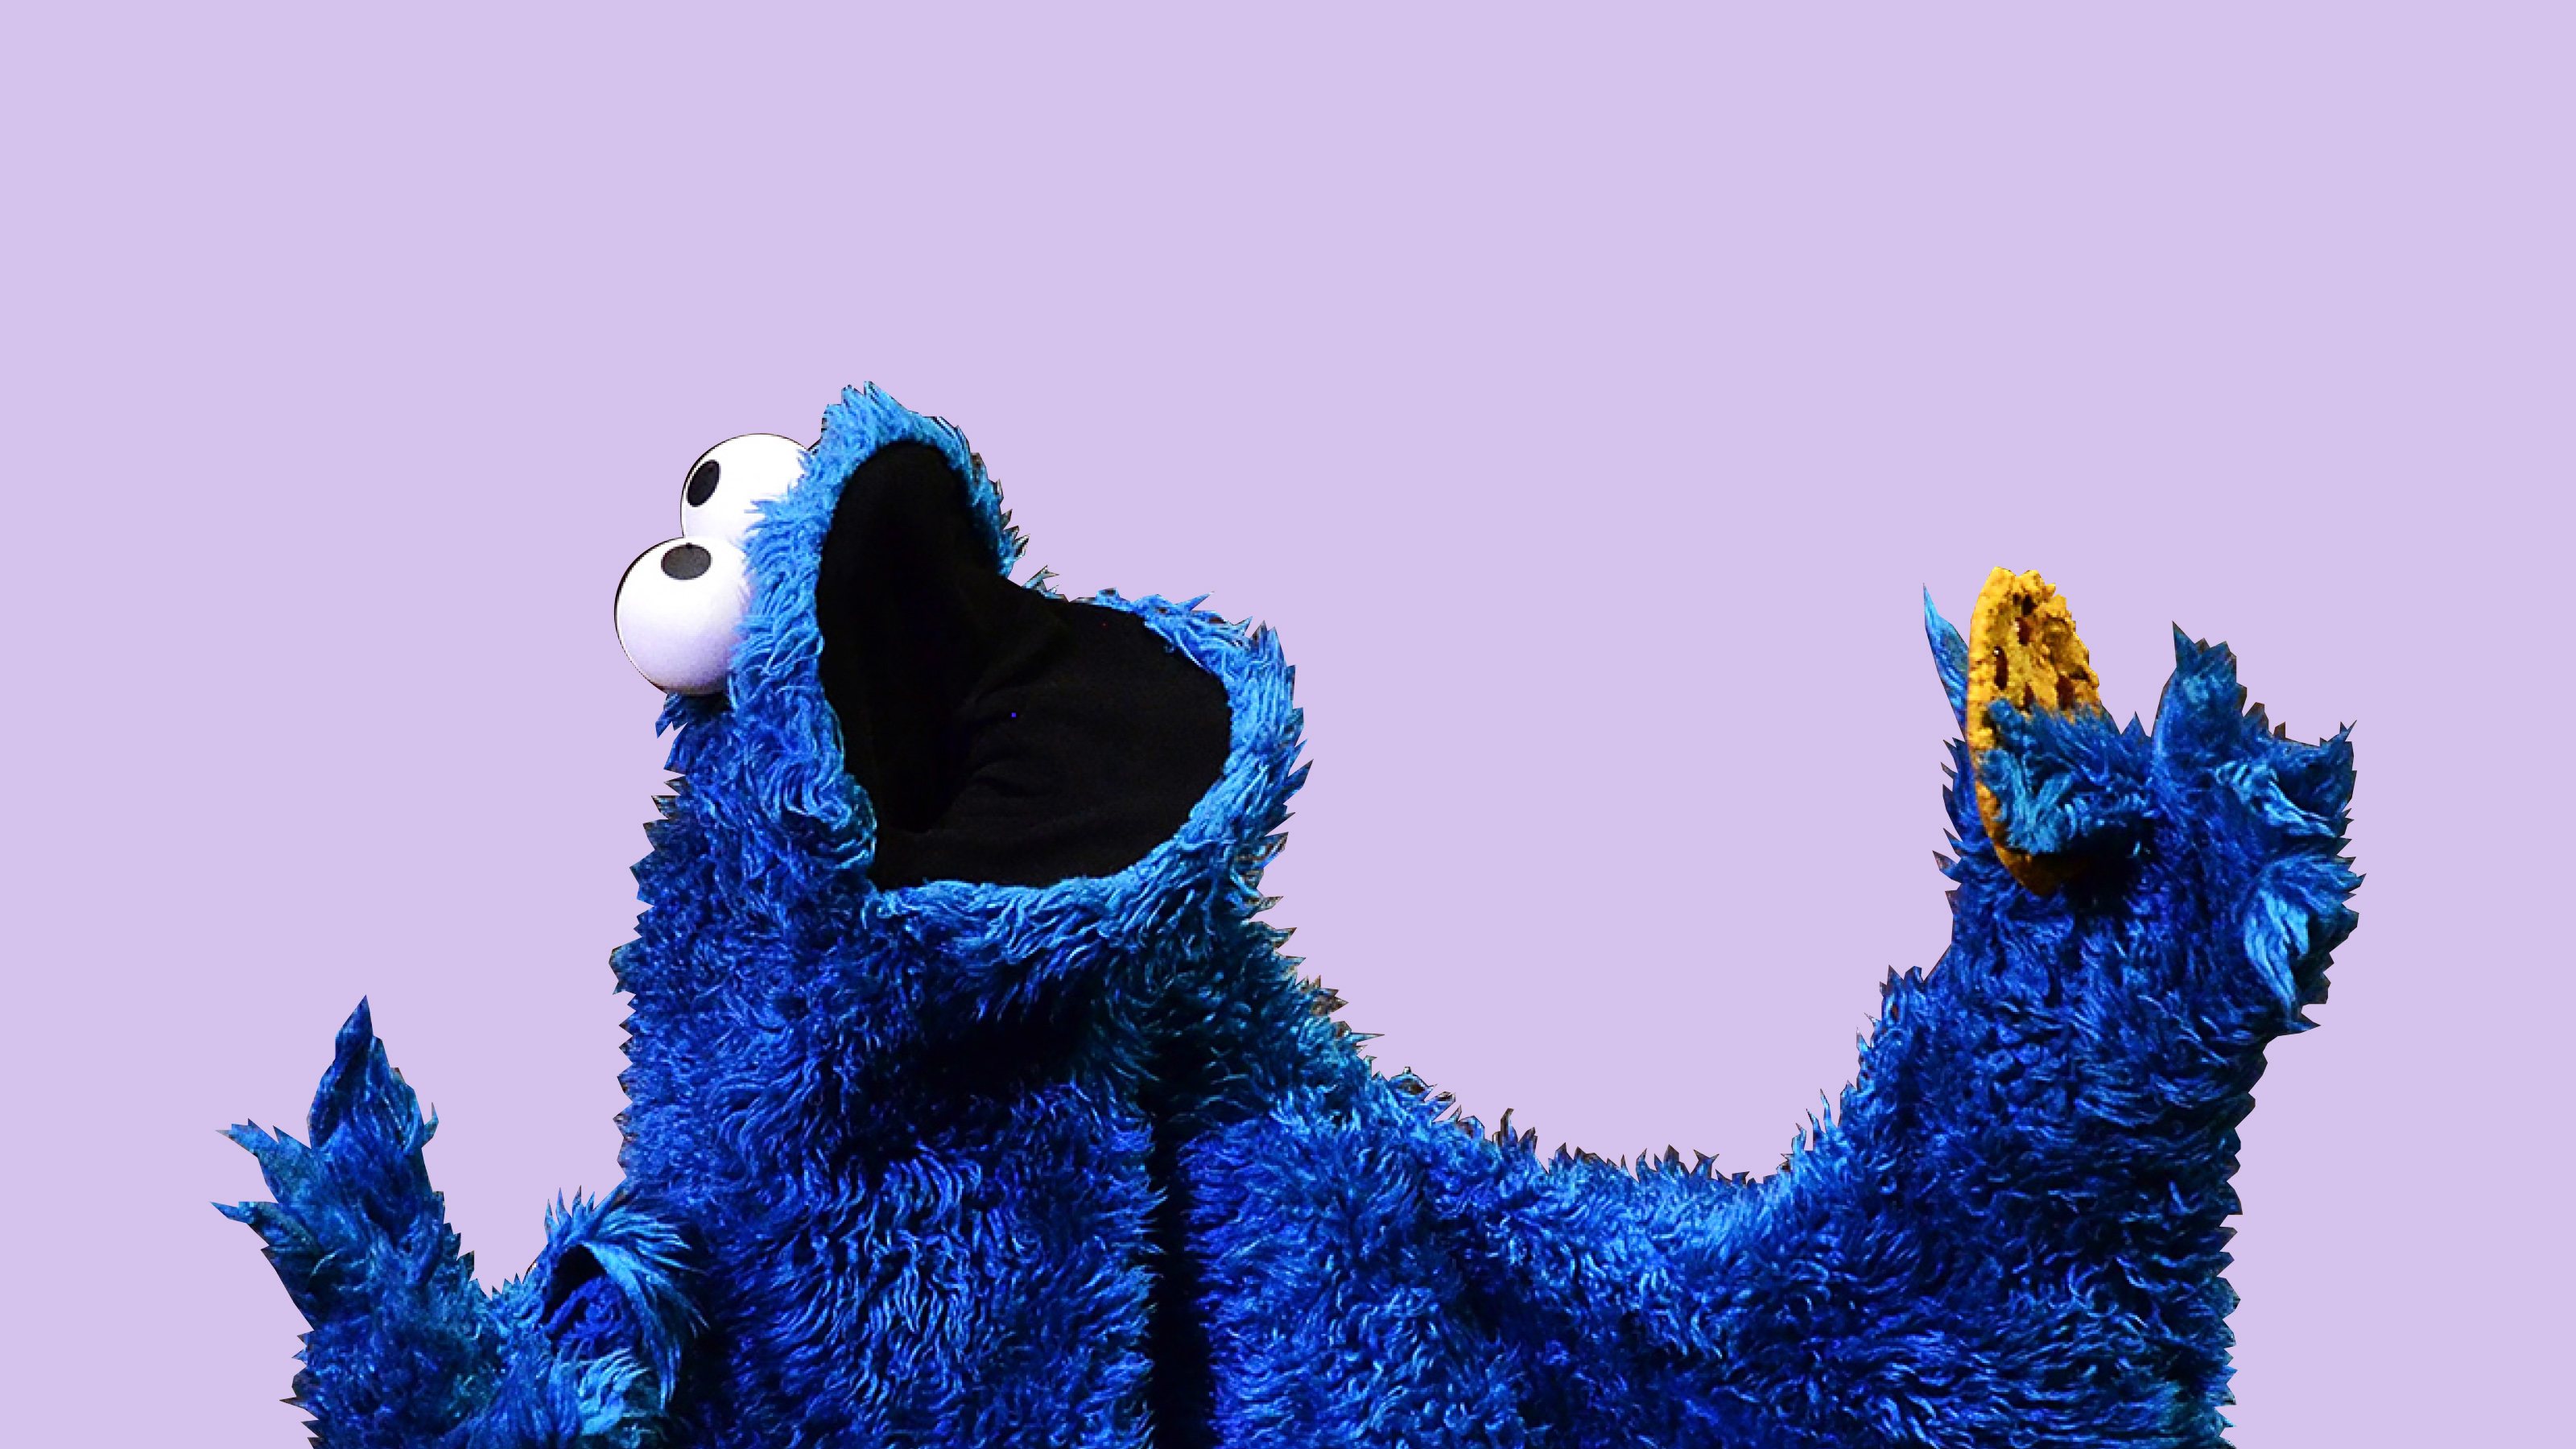 a close up of a cookie monster holding a banana.